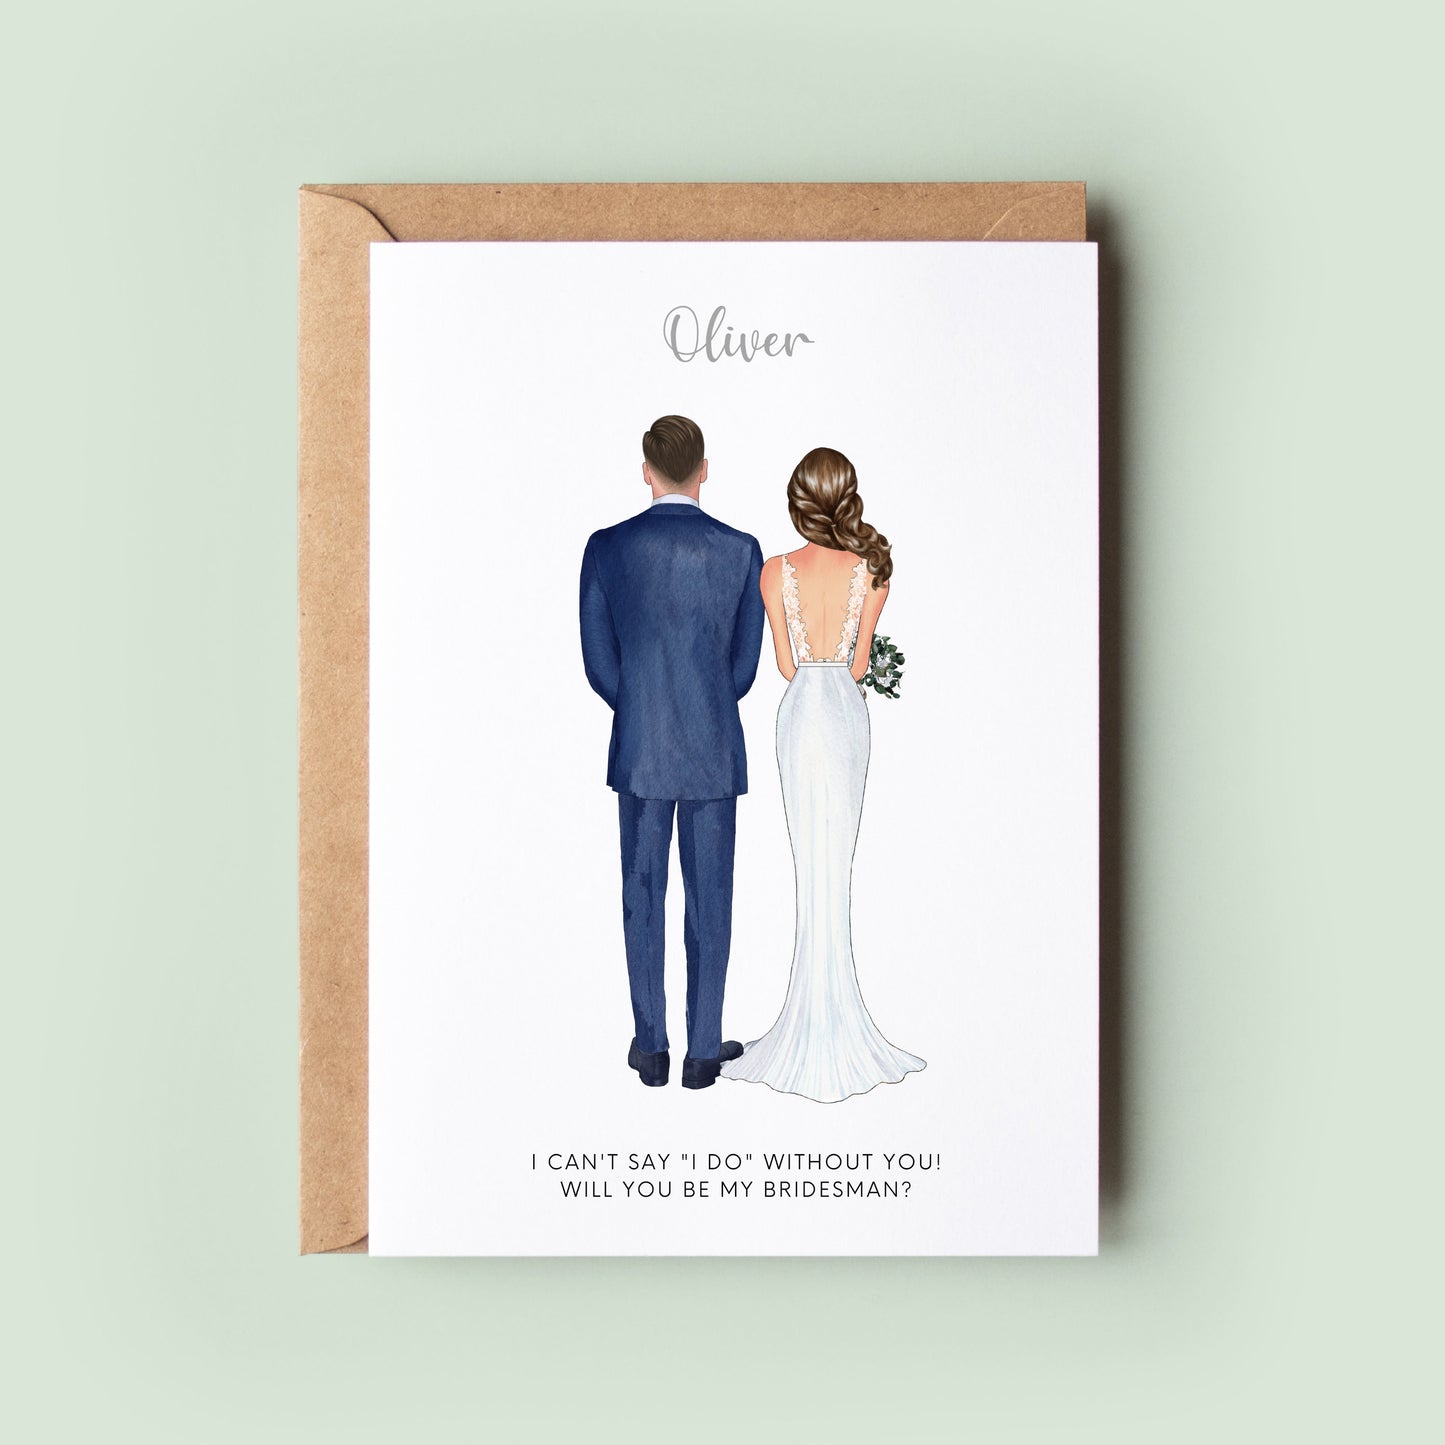 A customisable &#39;Will You Be My Bridesman&#39; card featuring personalised options for the bride&#39;s dress, bridesman suit, skin tones, and hair, with space for custom text.